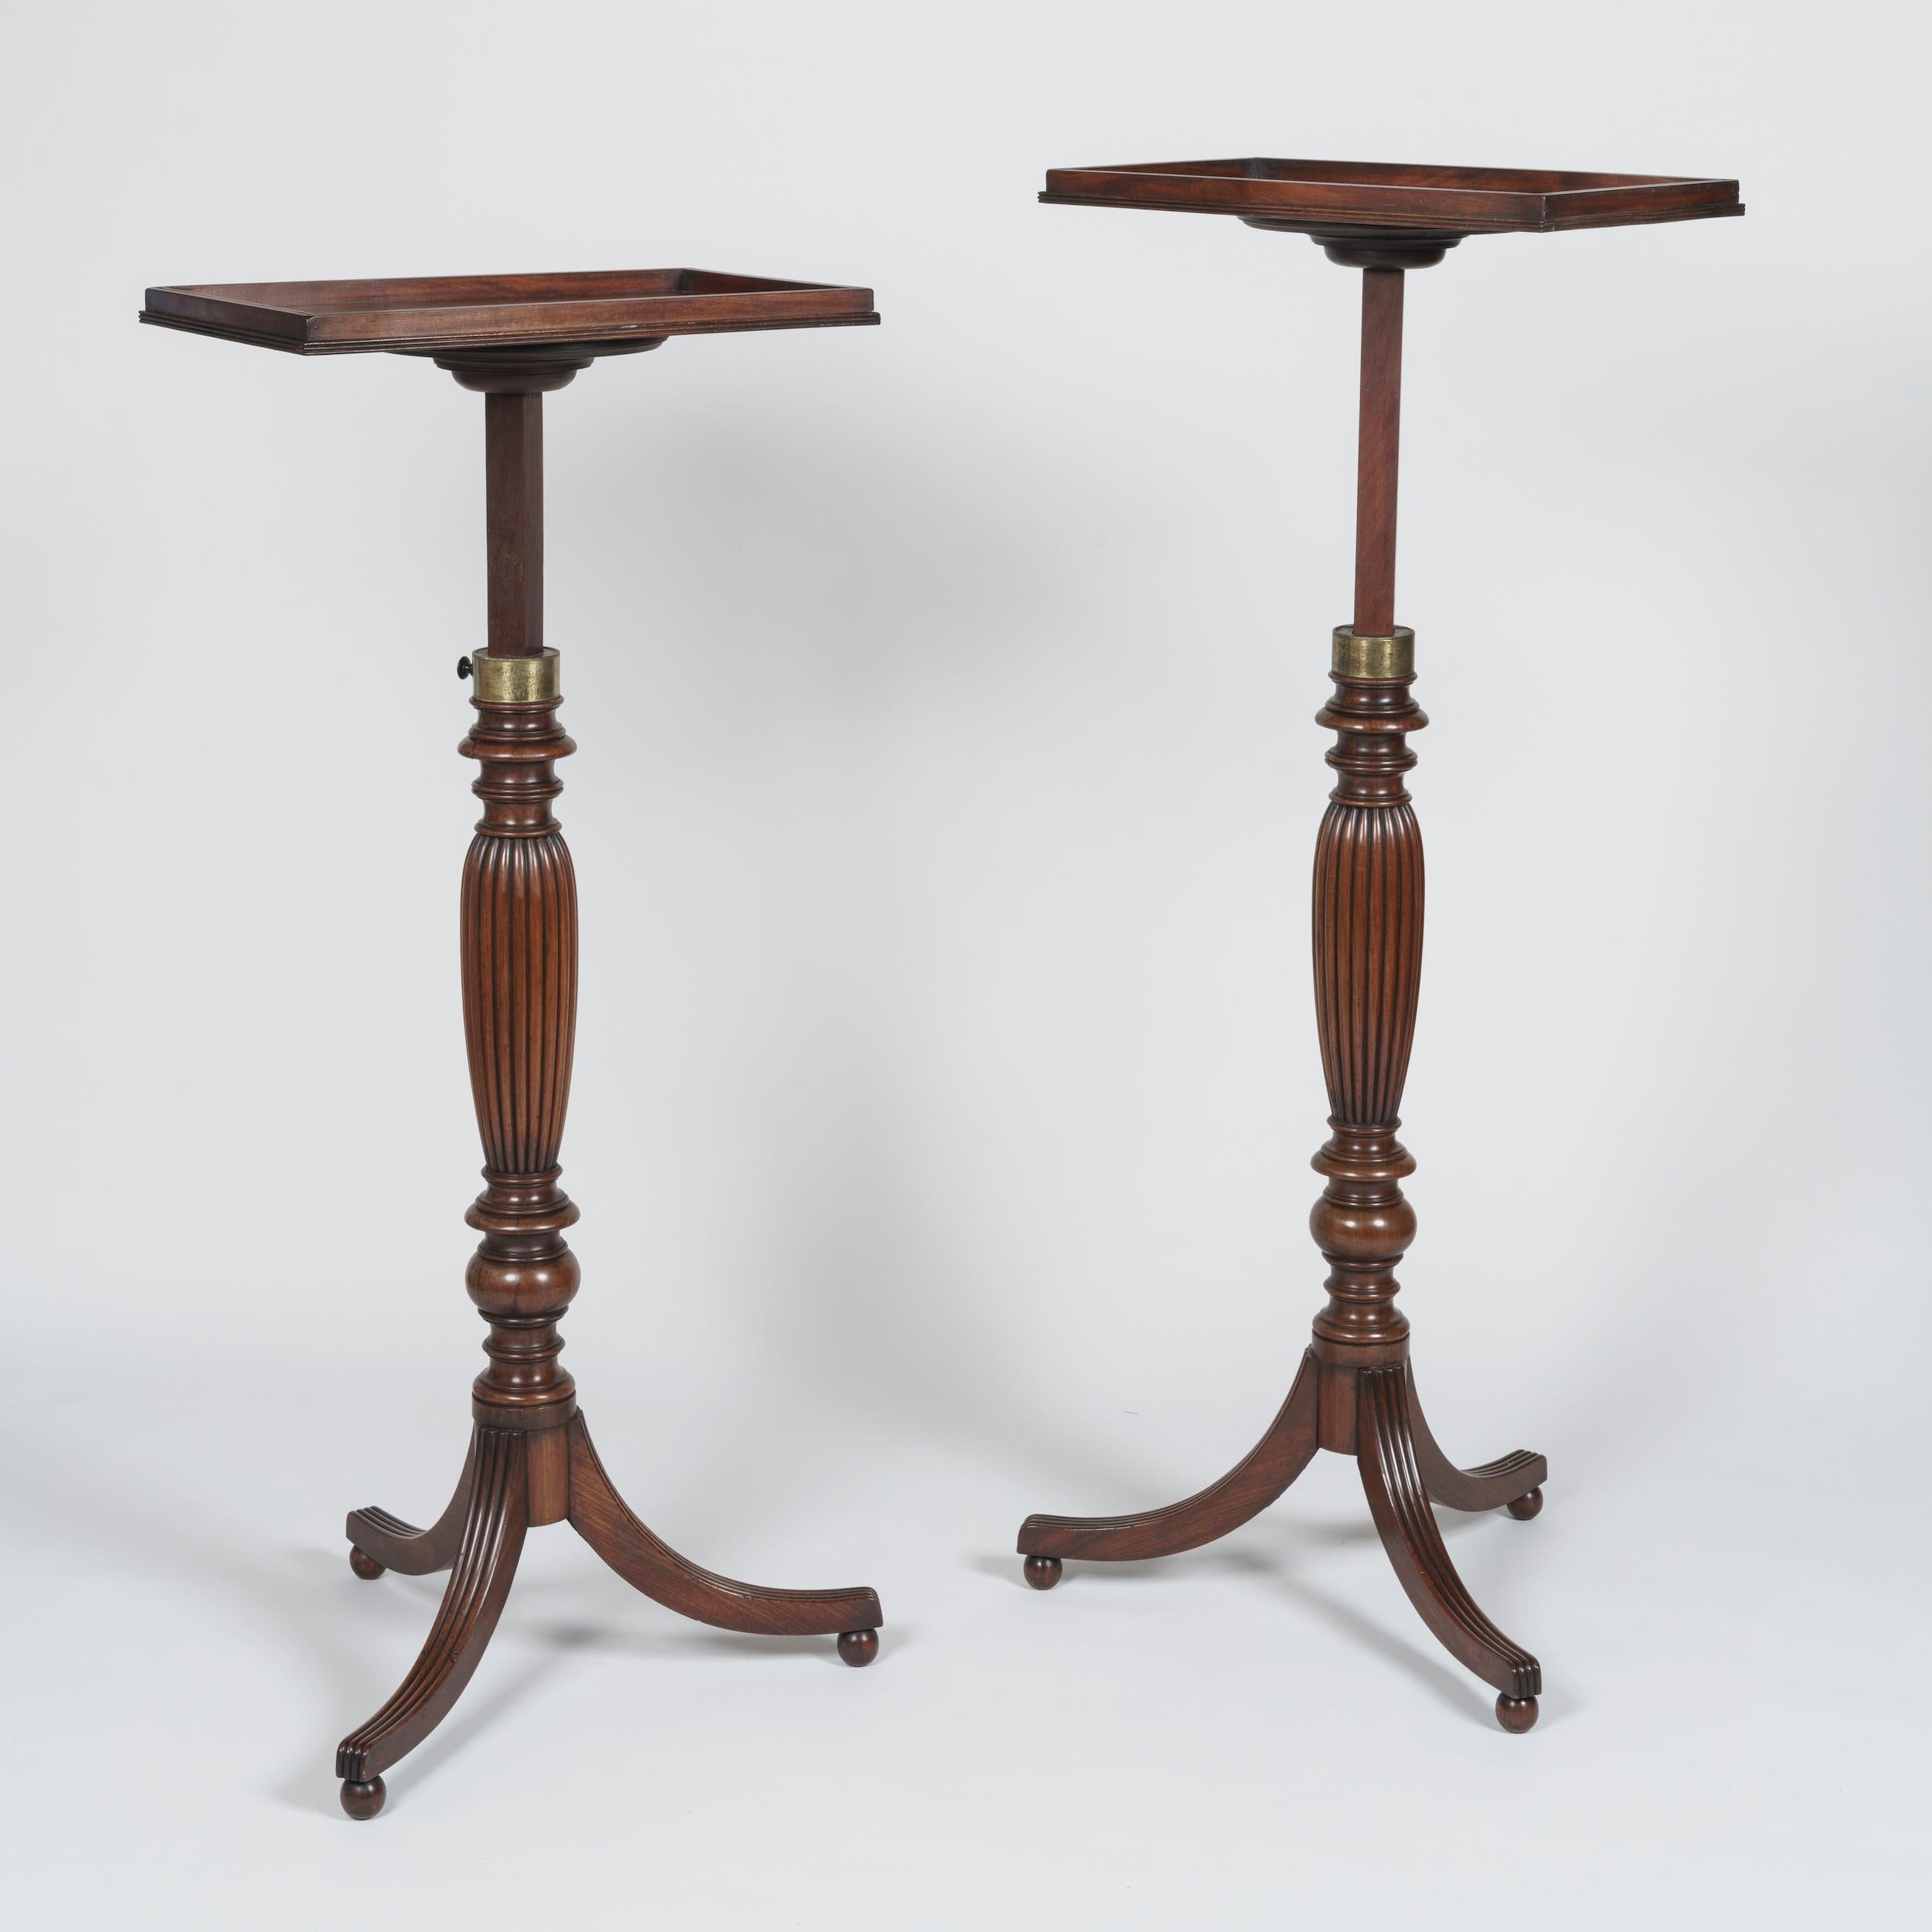 A Pair of Late Georgian adjustable tripod tables
Attributed to Gillows

Carved from mahogany, the tables supported on fluted and splayed legs with carved ball feet, the turned and reeded baluster-shaped stems of adjustable height having